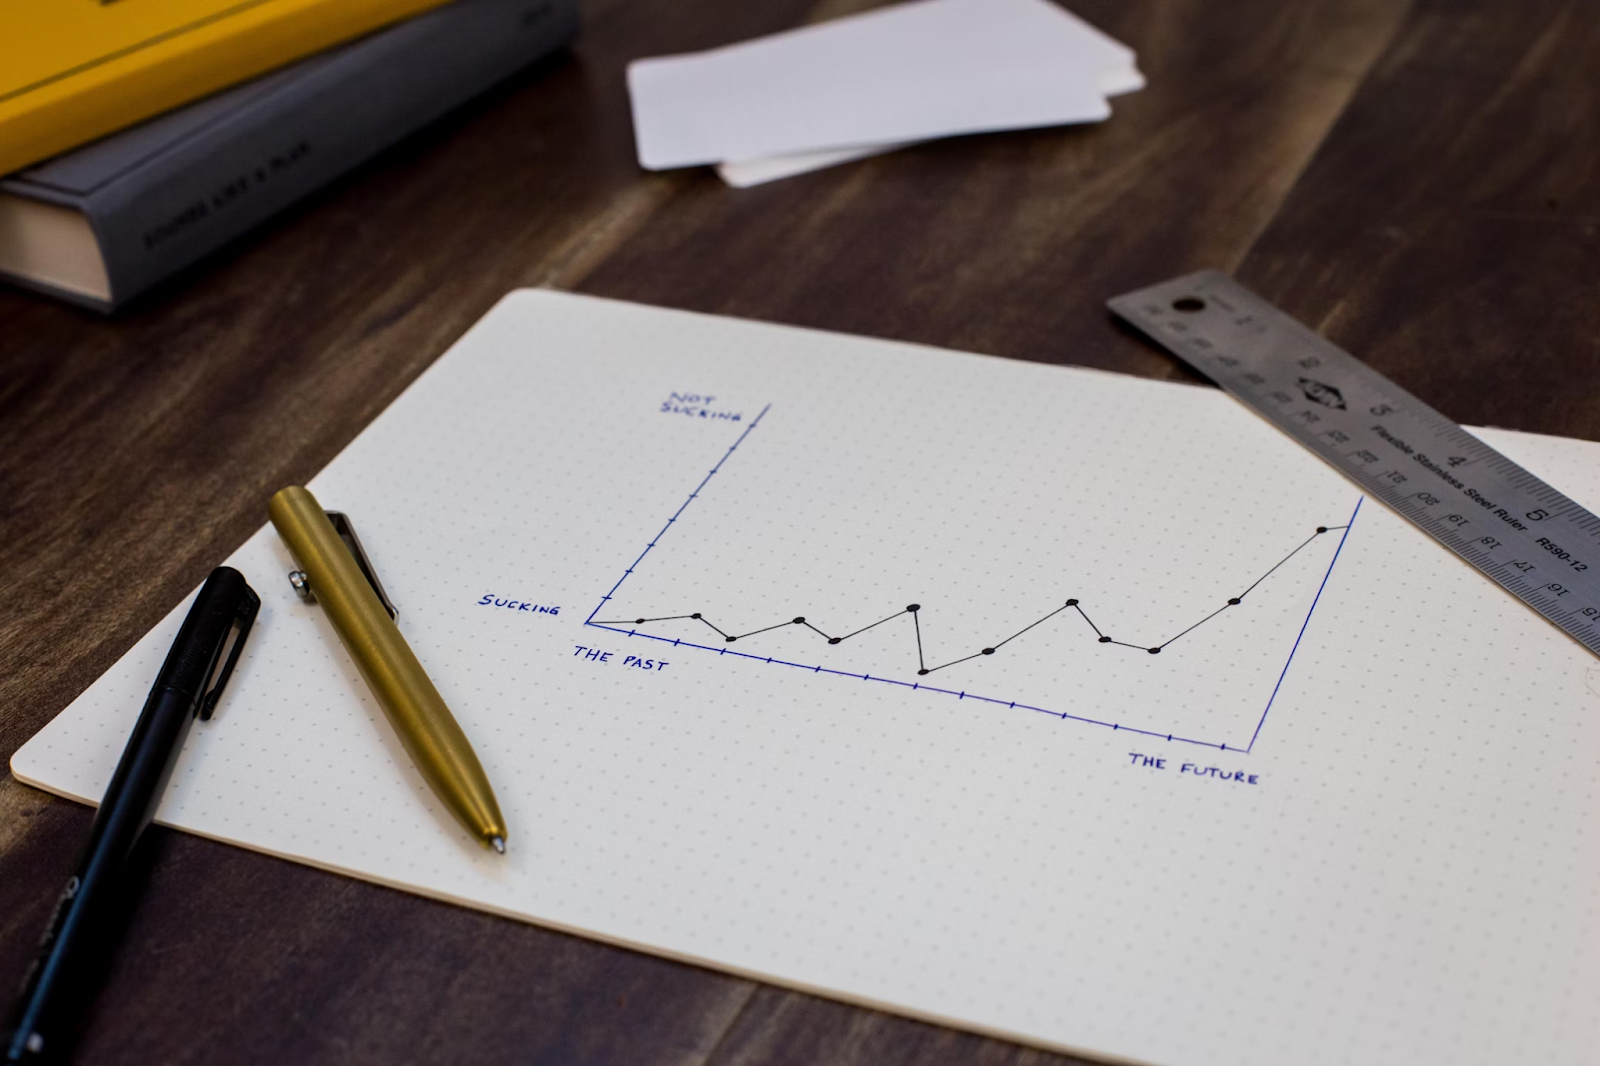 Pens, ruler, and paper with line graph on a wooden table